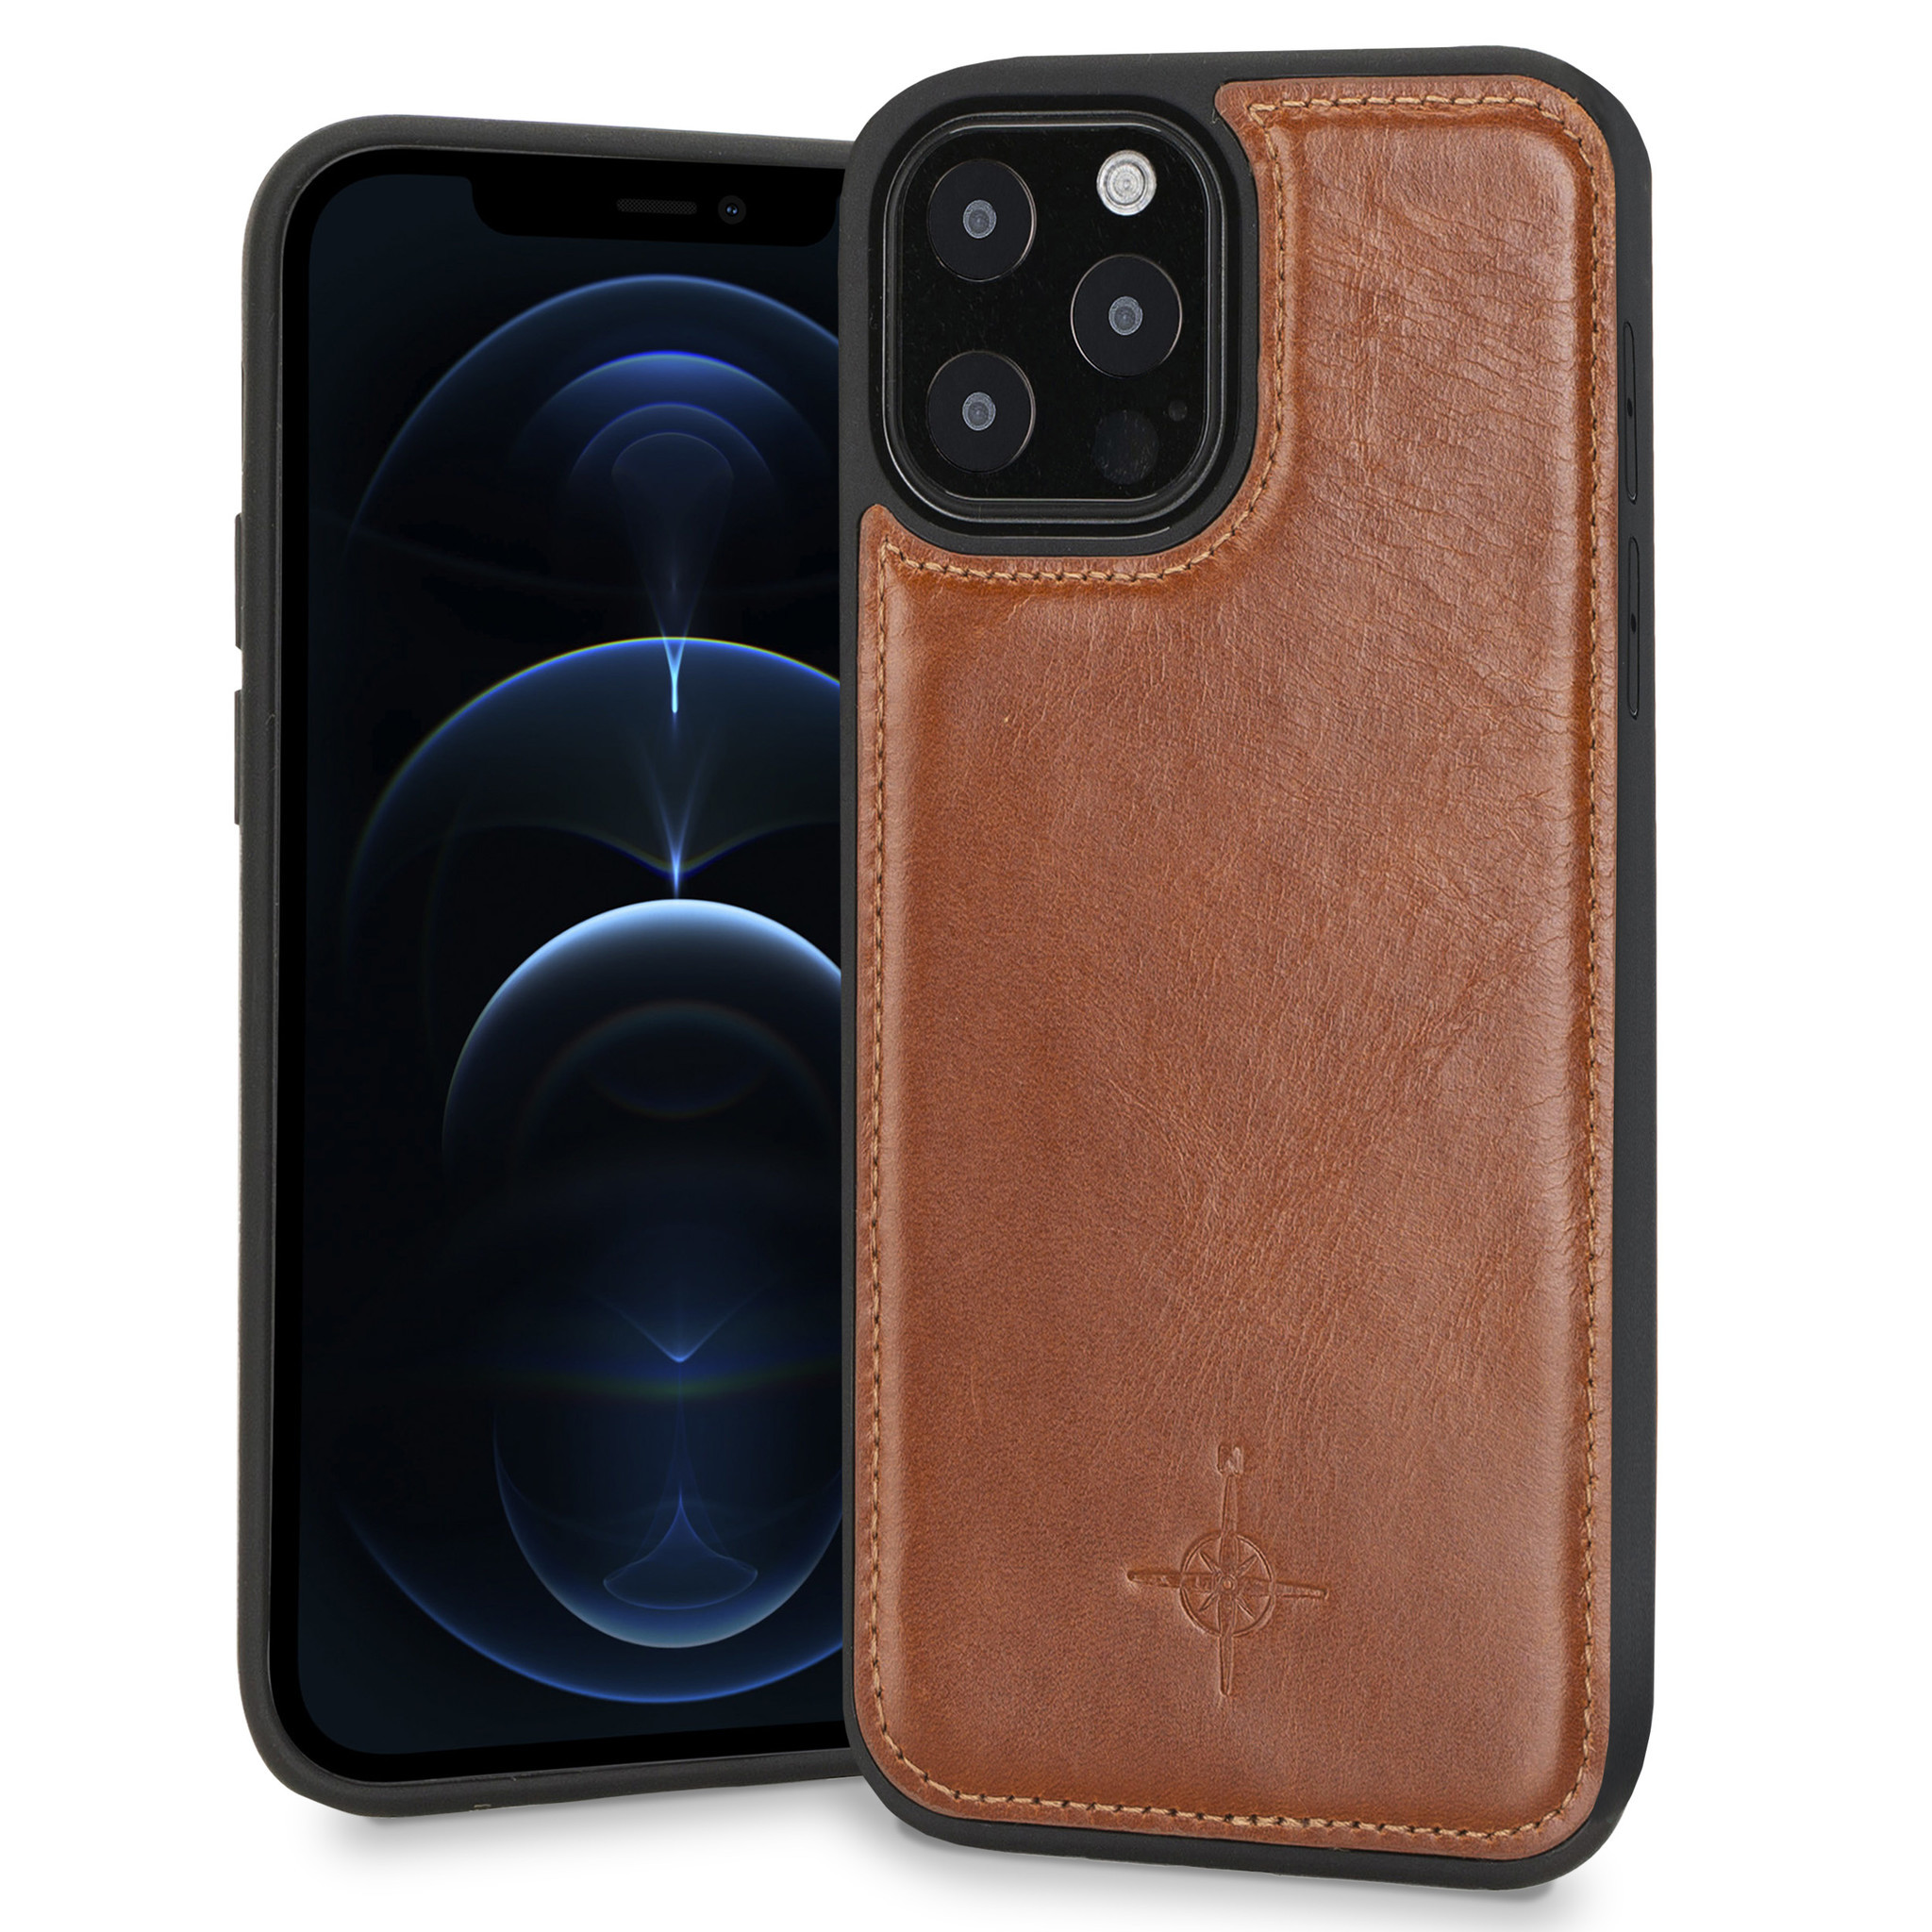 NorthLife - iPhone 12 / iPhone 12 Pro - Leren Backcover hoes - Cognac